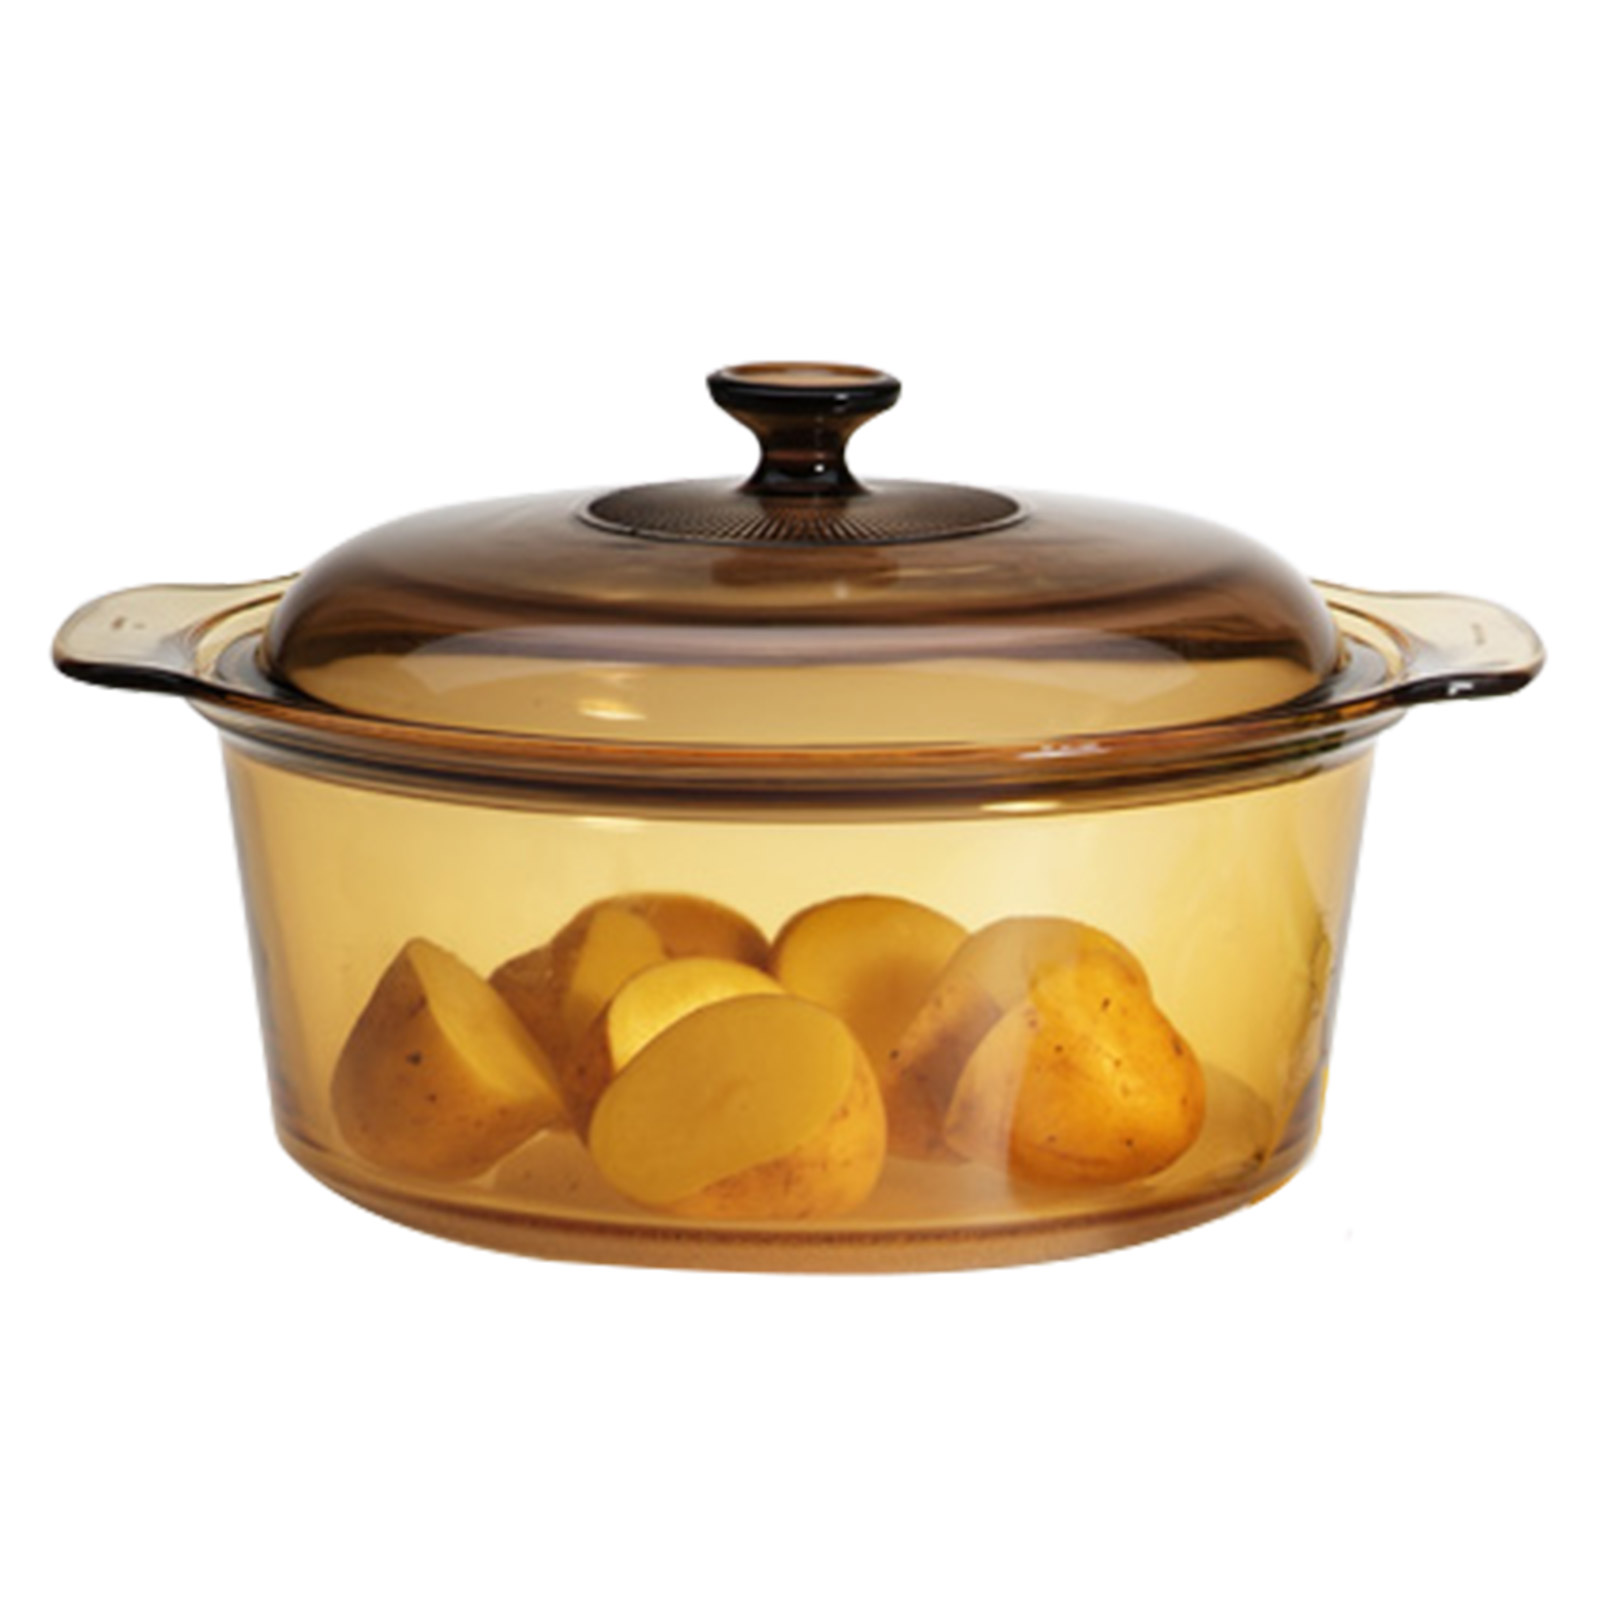 Buy Visions glass ceramic cooking pot 1.5 l for allergy sufferers